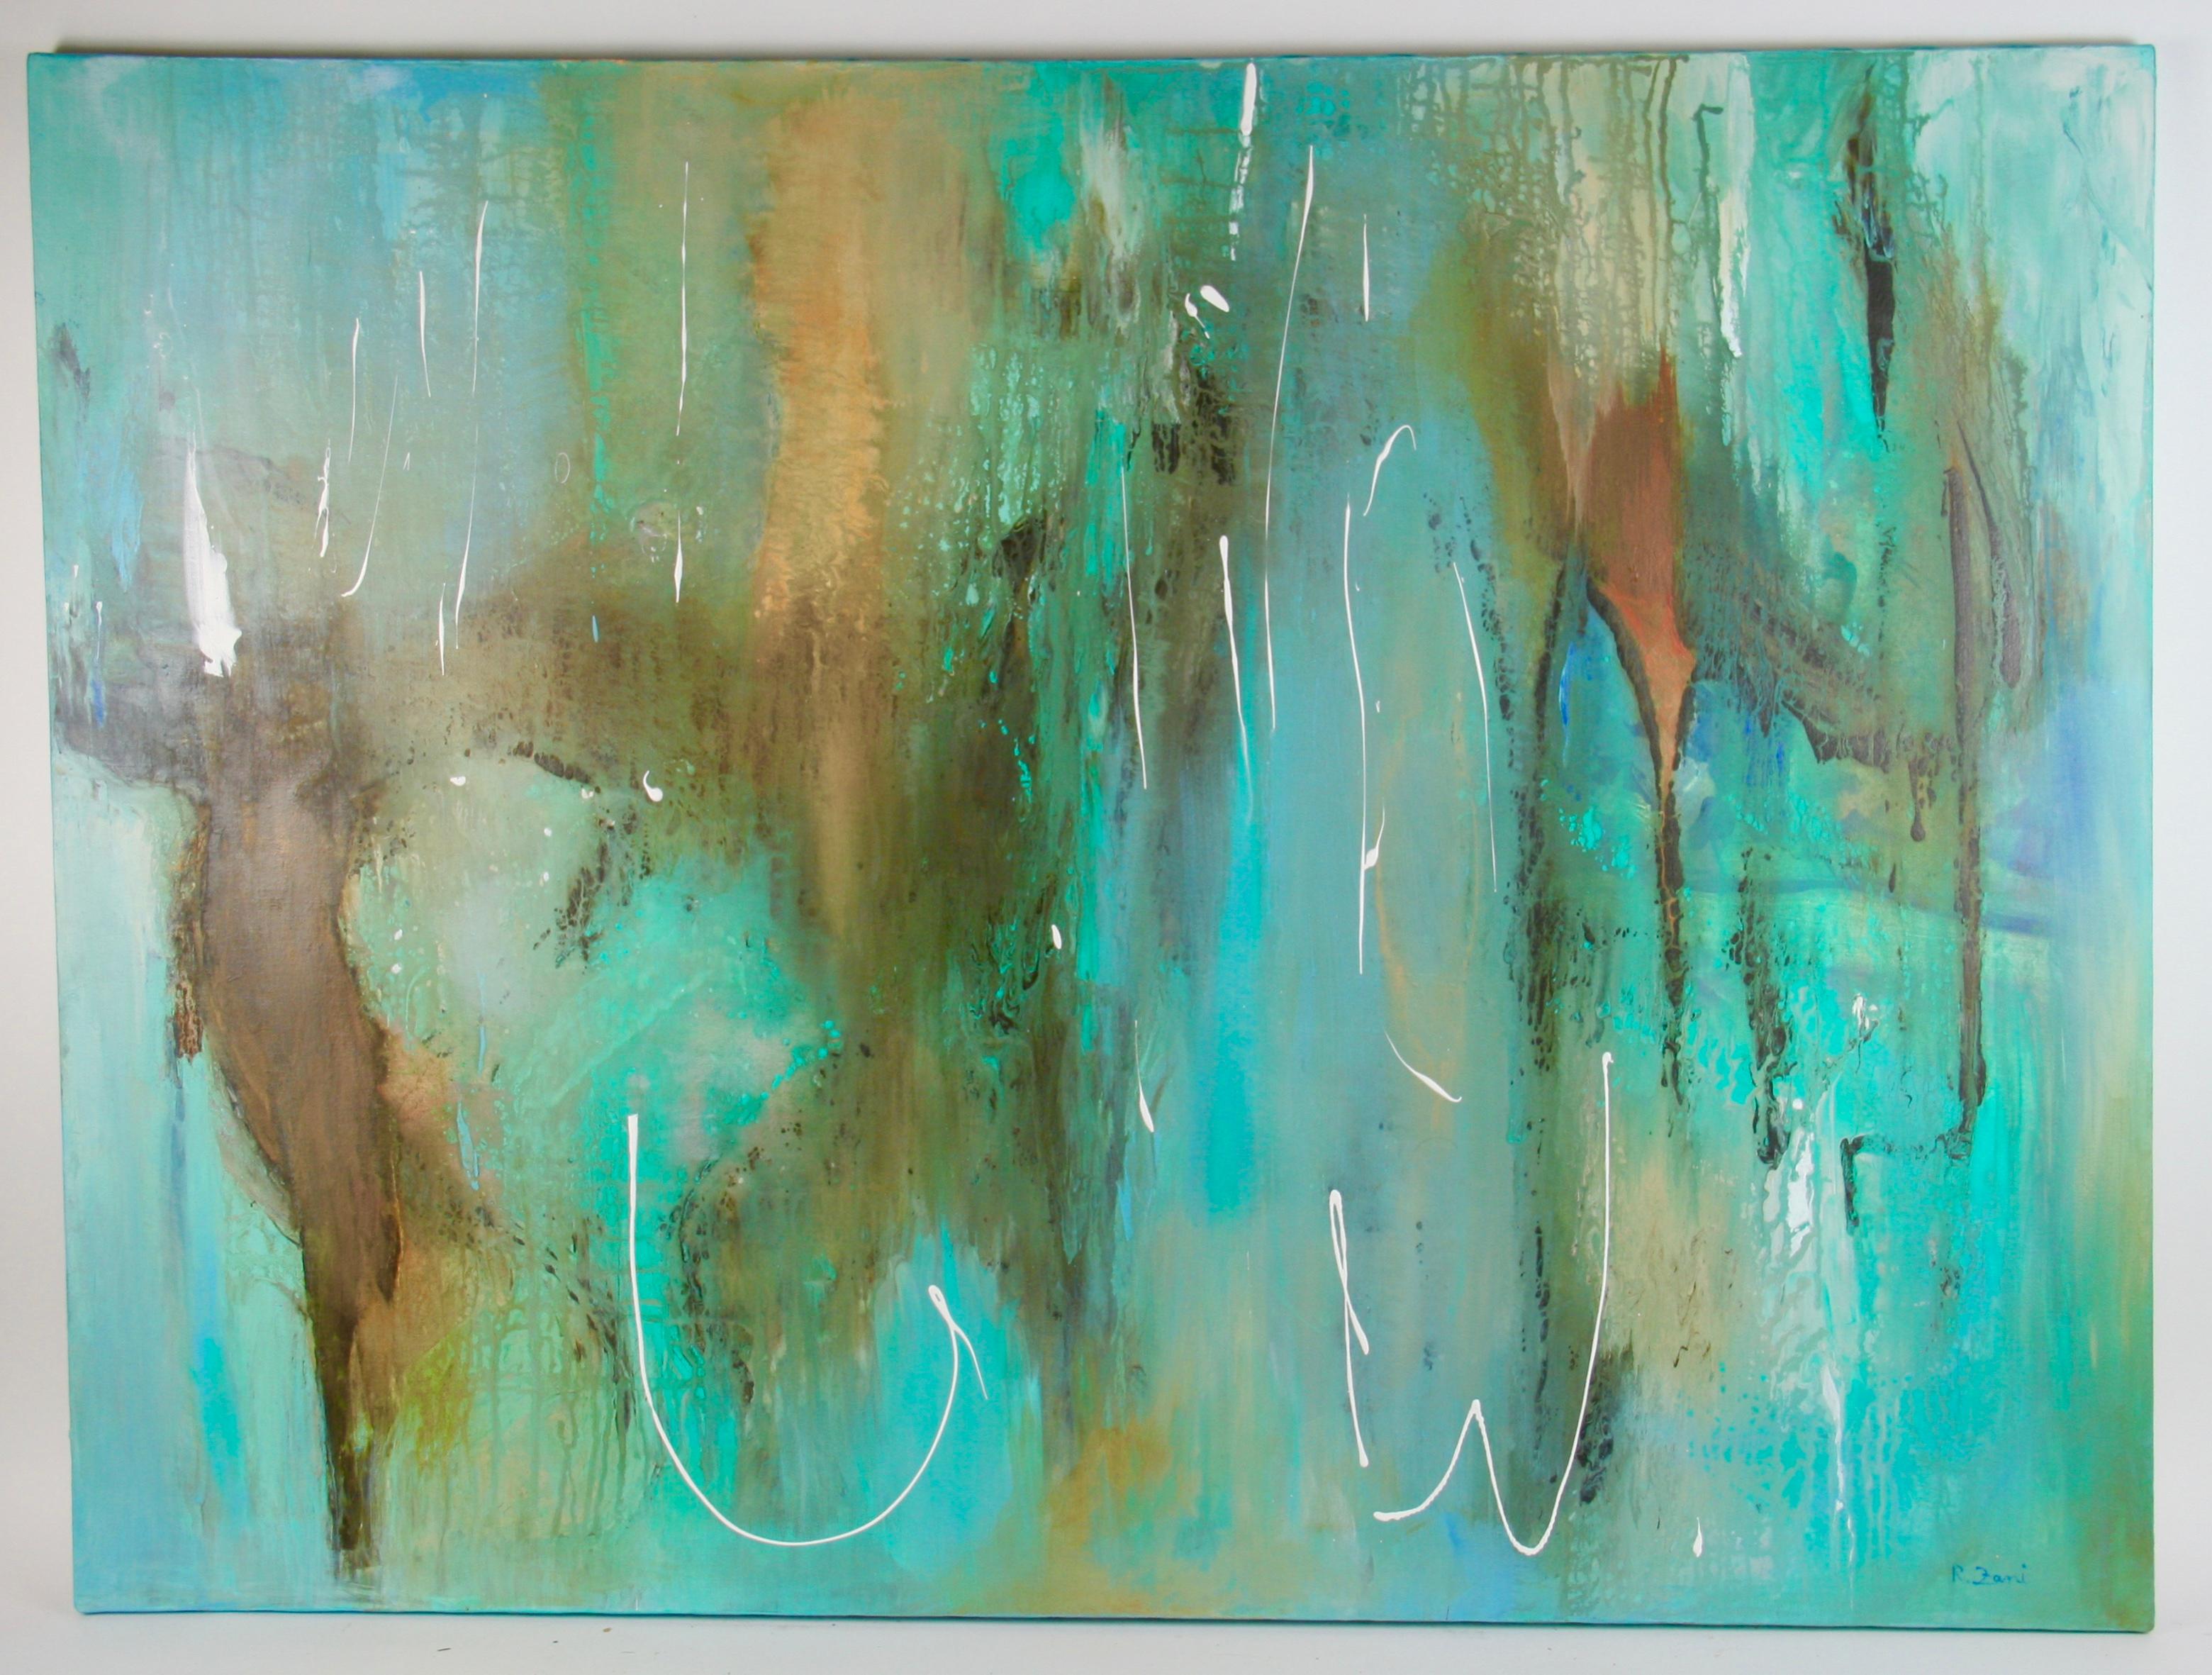 Large Scale Acquamarine Abstract Painting 2